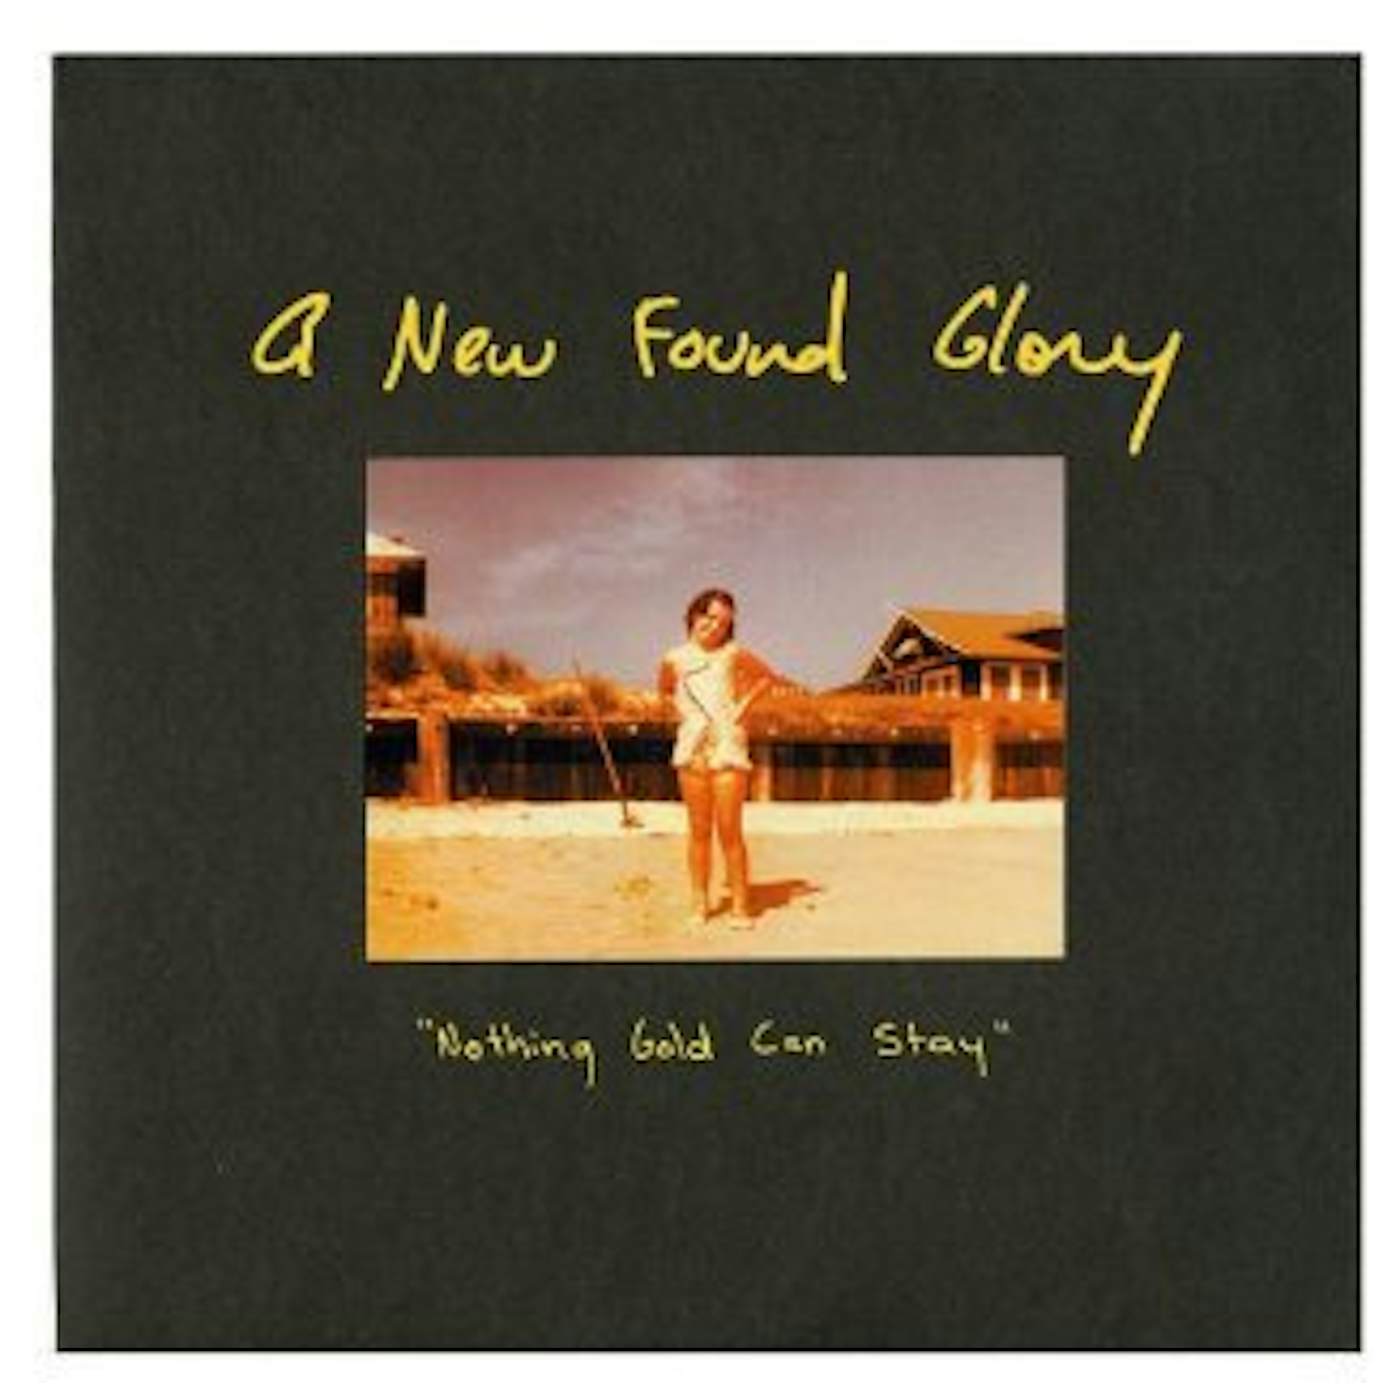 New Found Glory NOTHING GOLD CAN STAY (Vinyl)